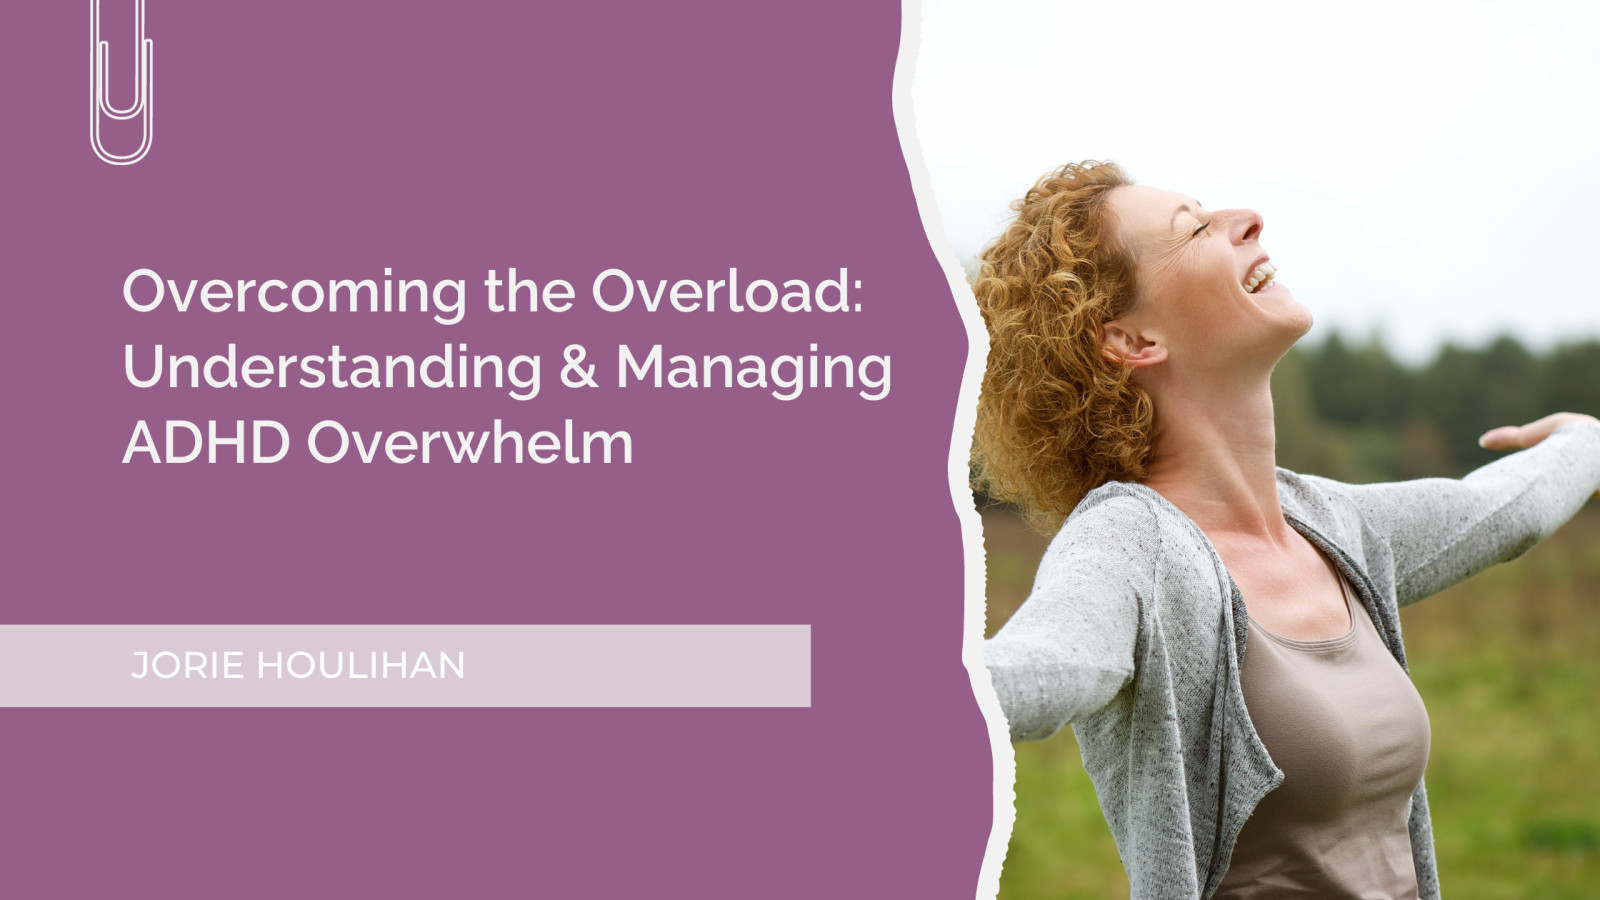 Overcoming the Overload: Understanding and Managing ADHD Overwhelm